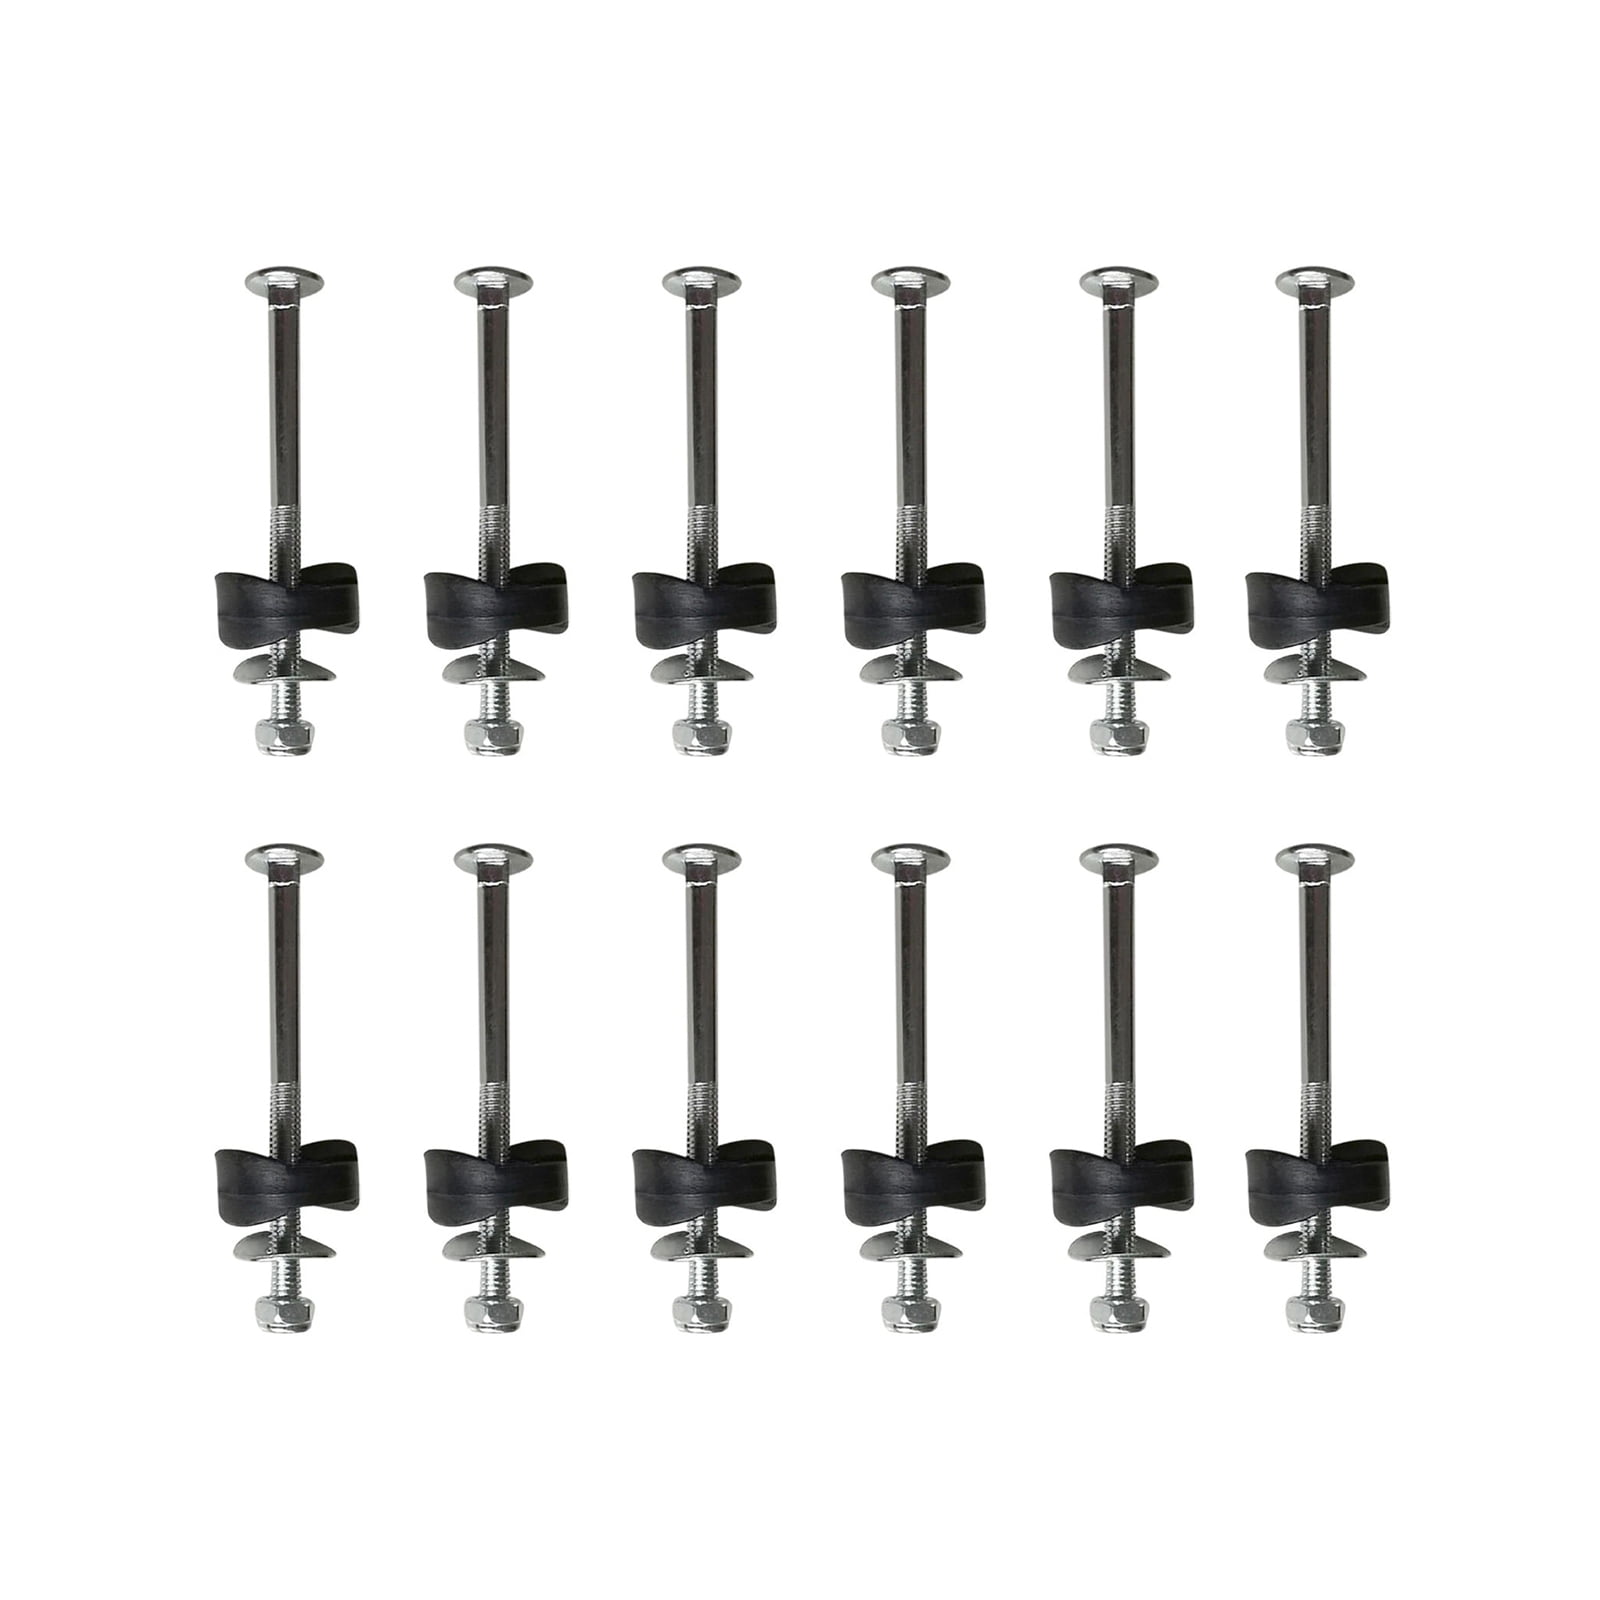 12pcs Trampoline Screws Set For Attaching The Trampoline High Quality Strong Trampoline Fixing Screws Kit Stability Tool Set Safety Trampoline Replacement Parts Accessories